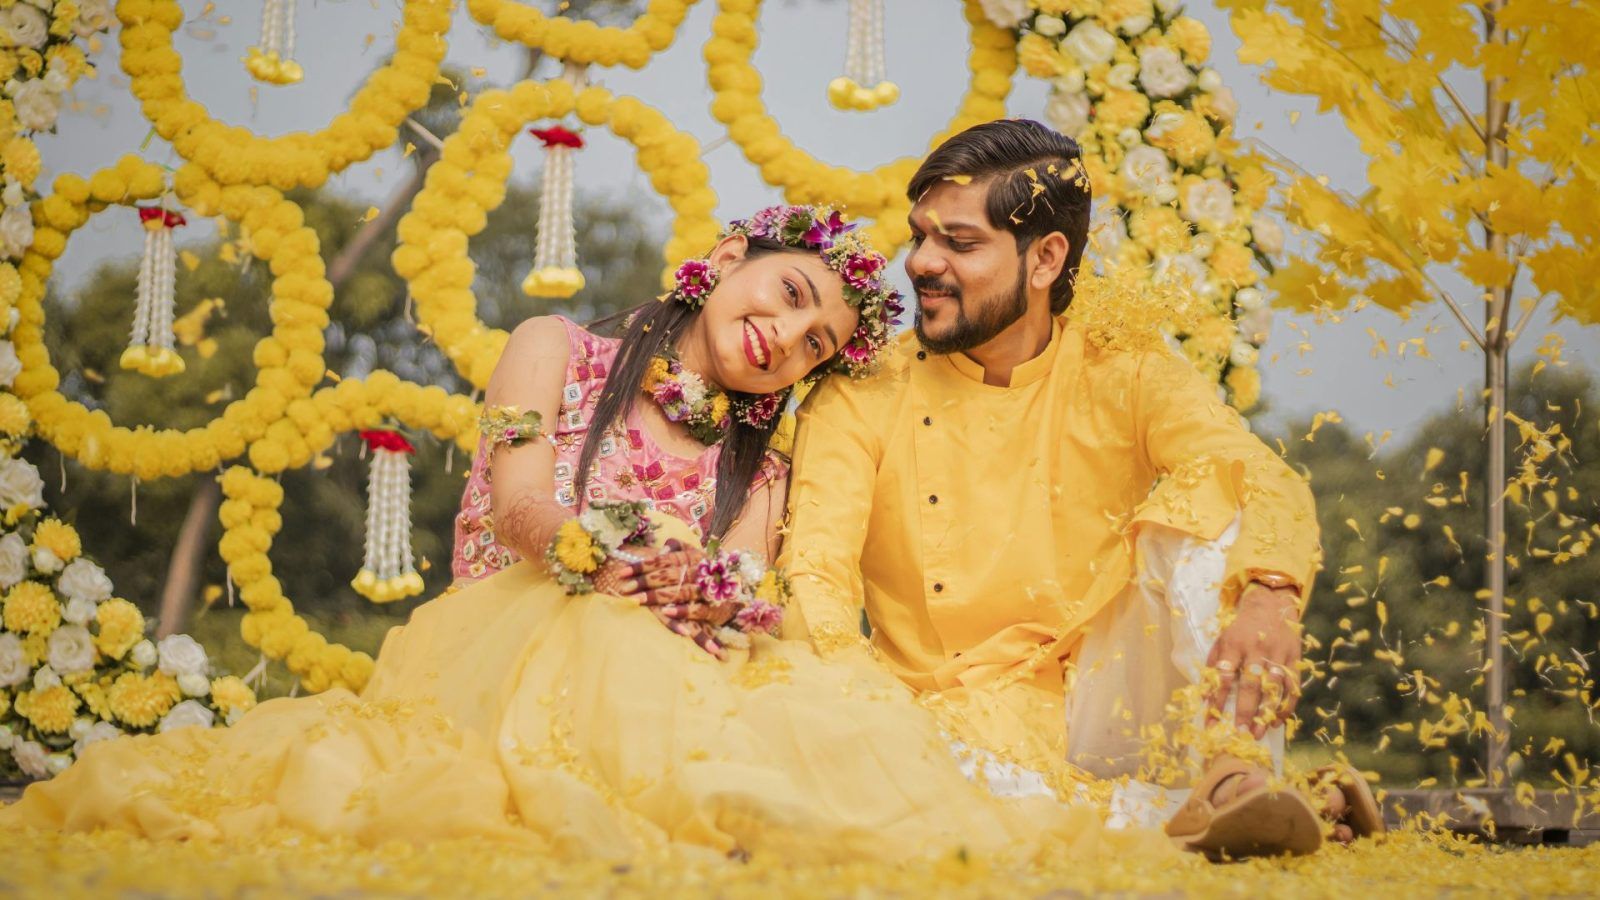 Grab The Attention With These Amazing Haldi Ceremony Outfits | Wedding dresses  men indian, Wedding dress men, Wedding kurta for men